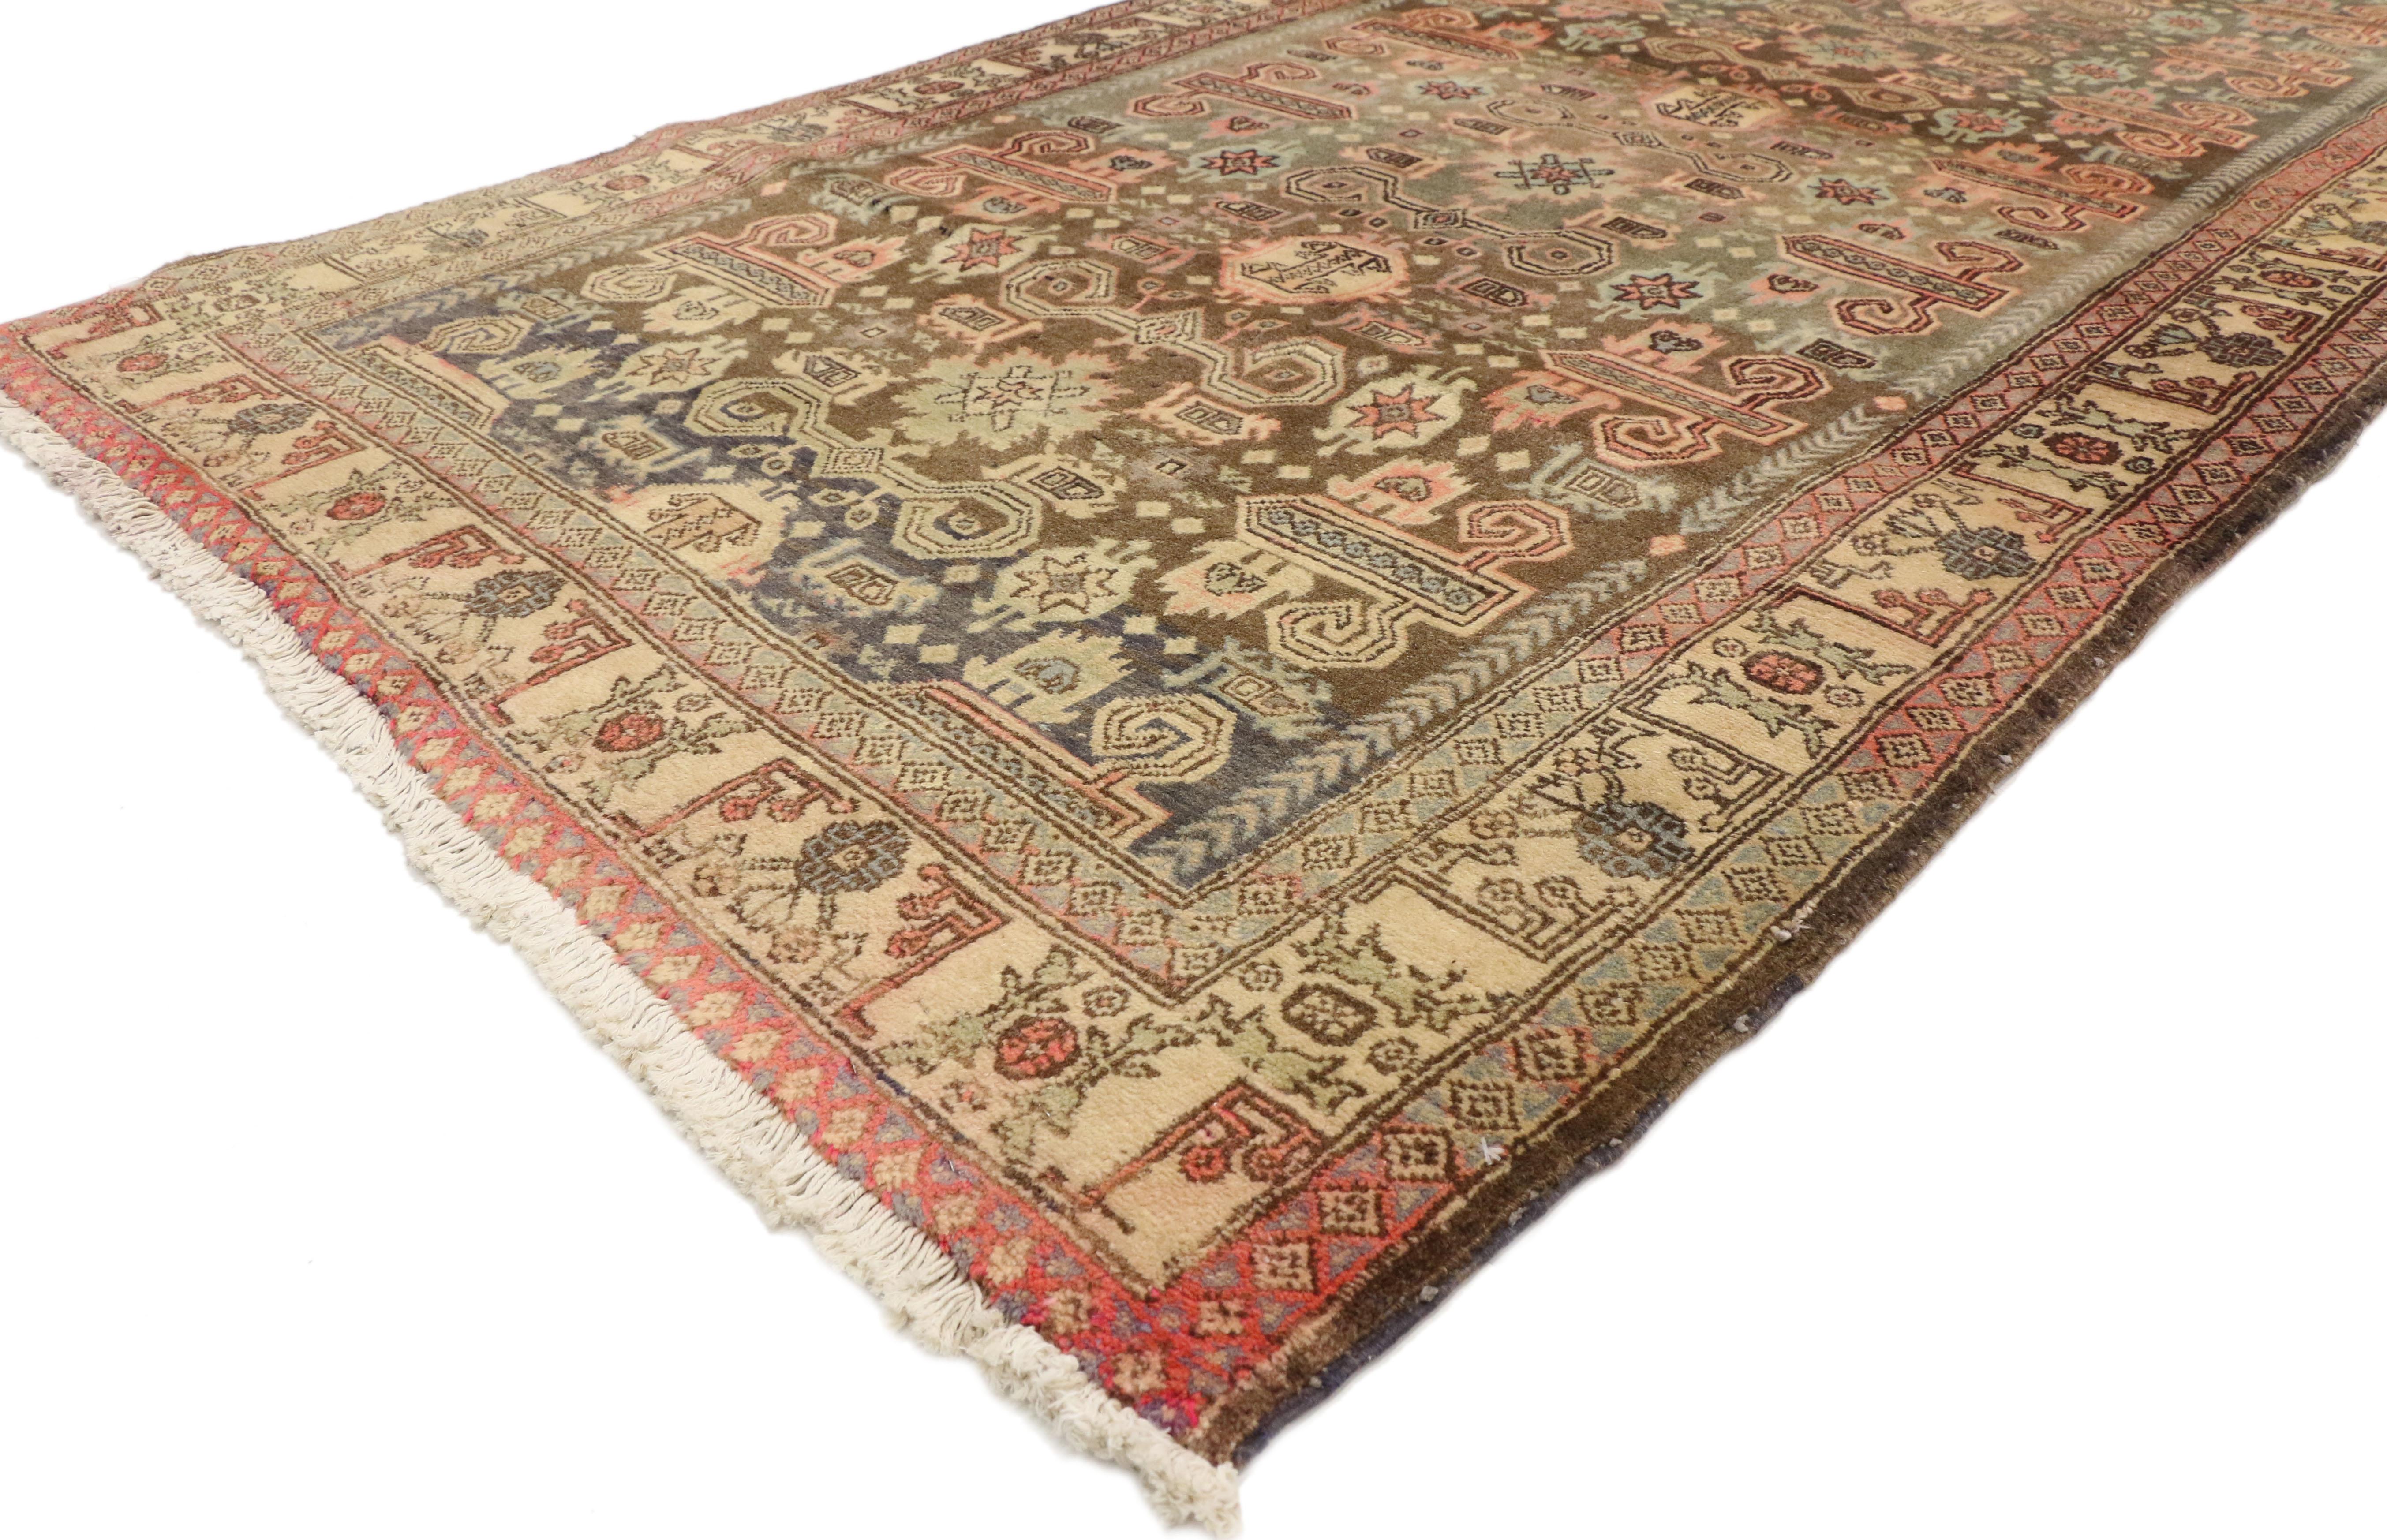 76527, vintage Persian Azerbaijan hallway runner with warm, Bohemian Bungalow style. Rich symbolism woven in pastel hues create uniquely feminine tribal vibe in this vintage Persian Azerbaijan runner. Ram's horns, Hands on Hips (elibelinde),